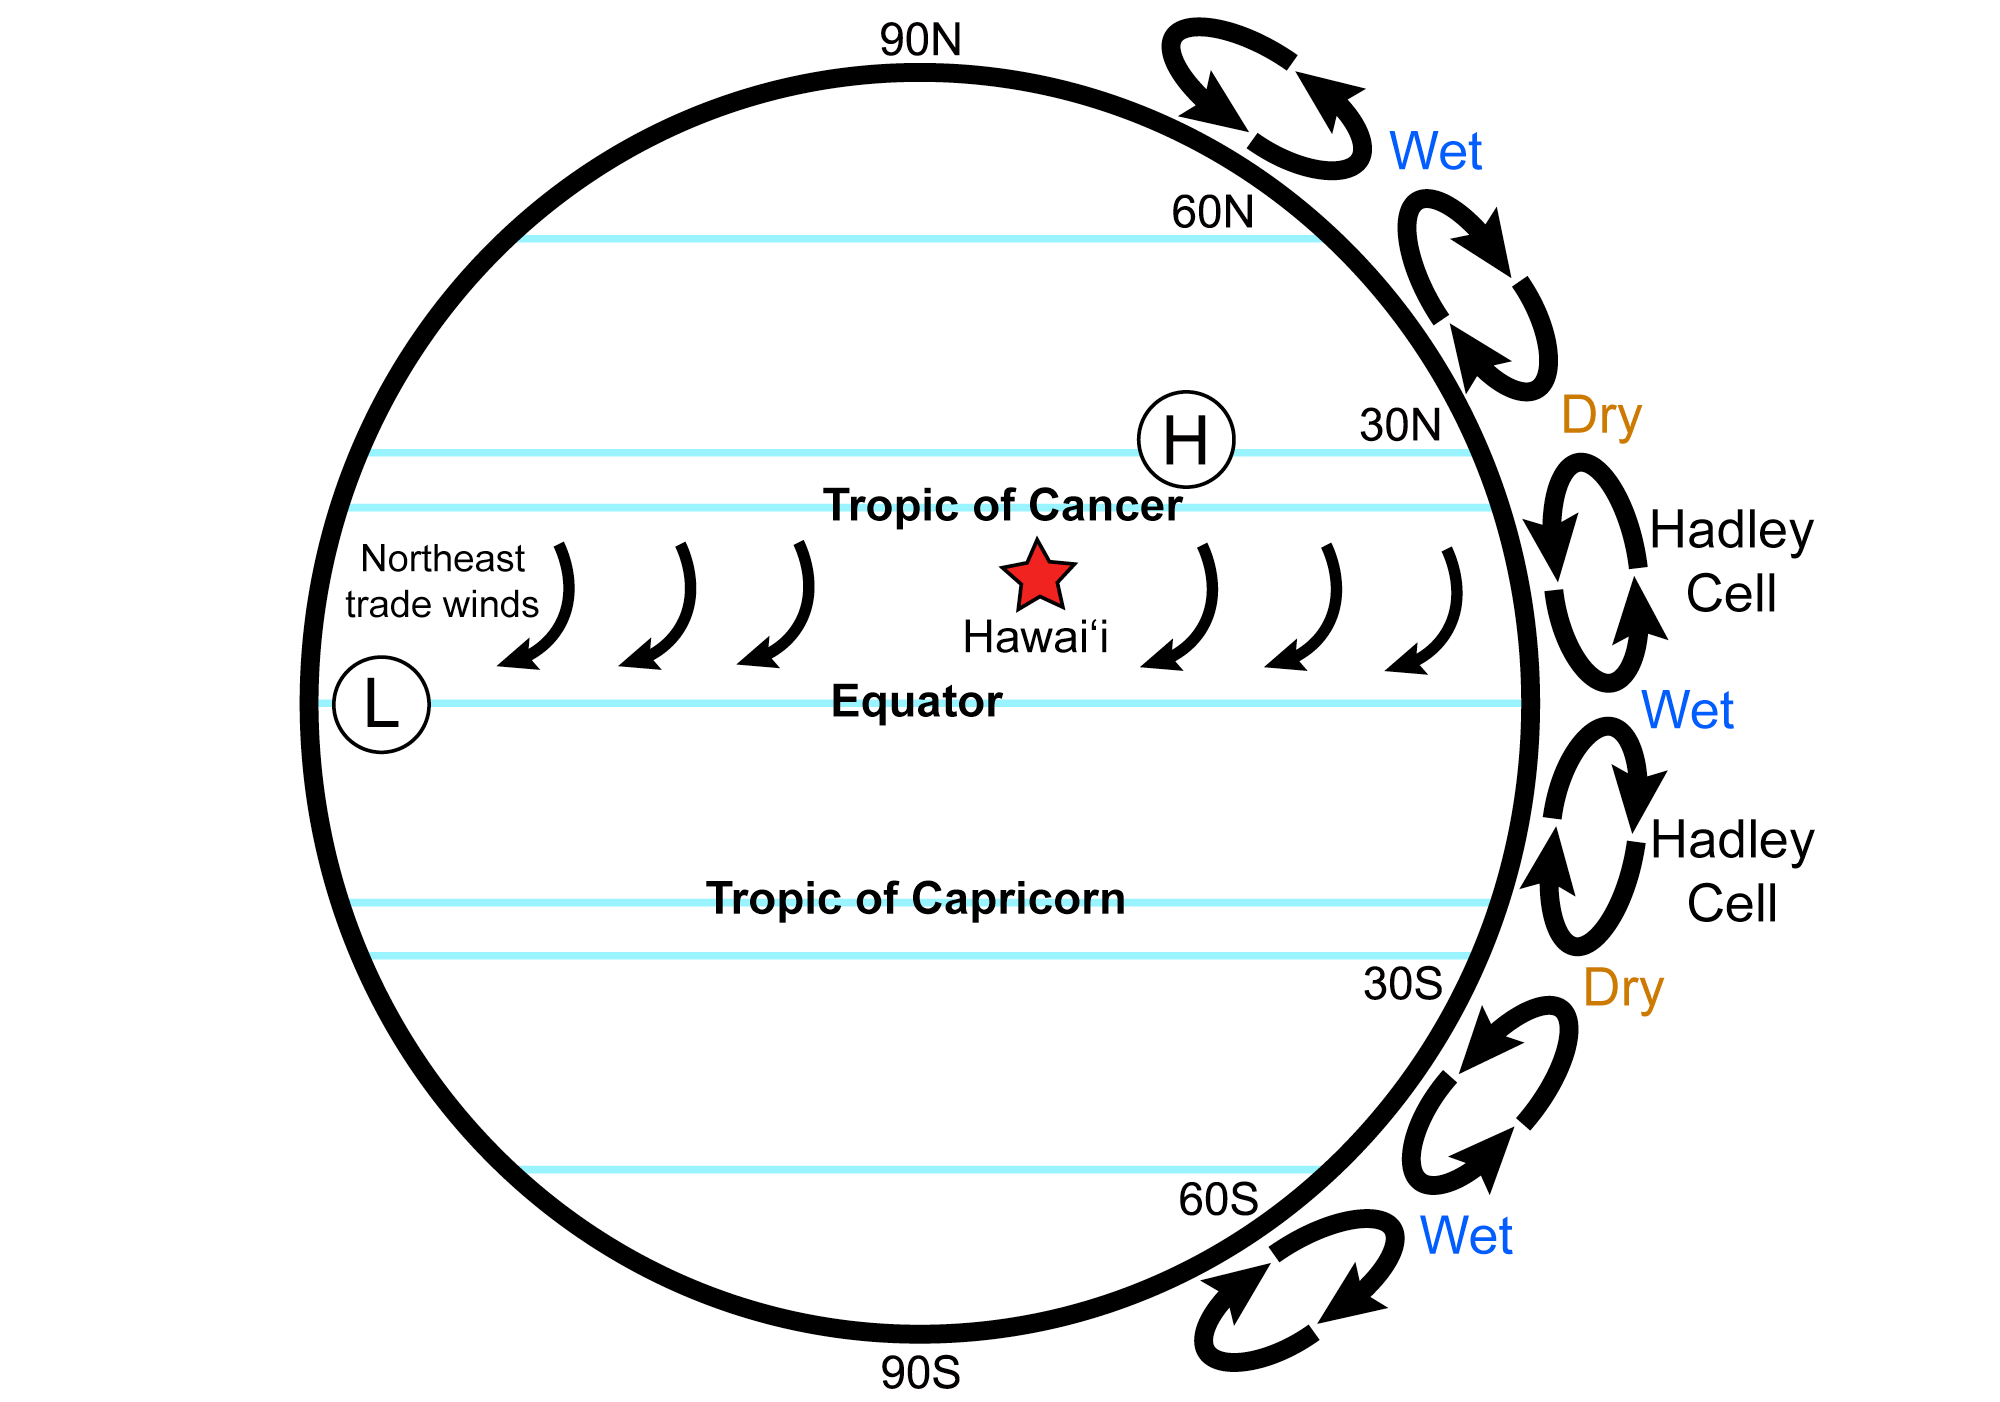 Illustration showing the effects of Hadley cells in the tropics. The Hadley cell circulates air from the equator towards the poles. As the air rises, it produces rain near the equator. As it sinks near 30 degrees latitude, it is dry, producing desert conditions. The sinking air is deflected westward to the Earth's rotation, creating trade winds. In the northern hemisphere, these winds flow from the northeast toward the southwest as they blow from higher latitudes toward the equator.